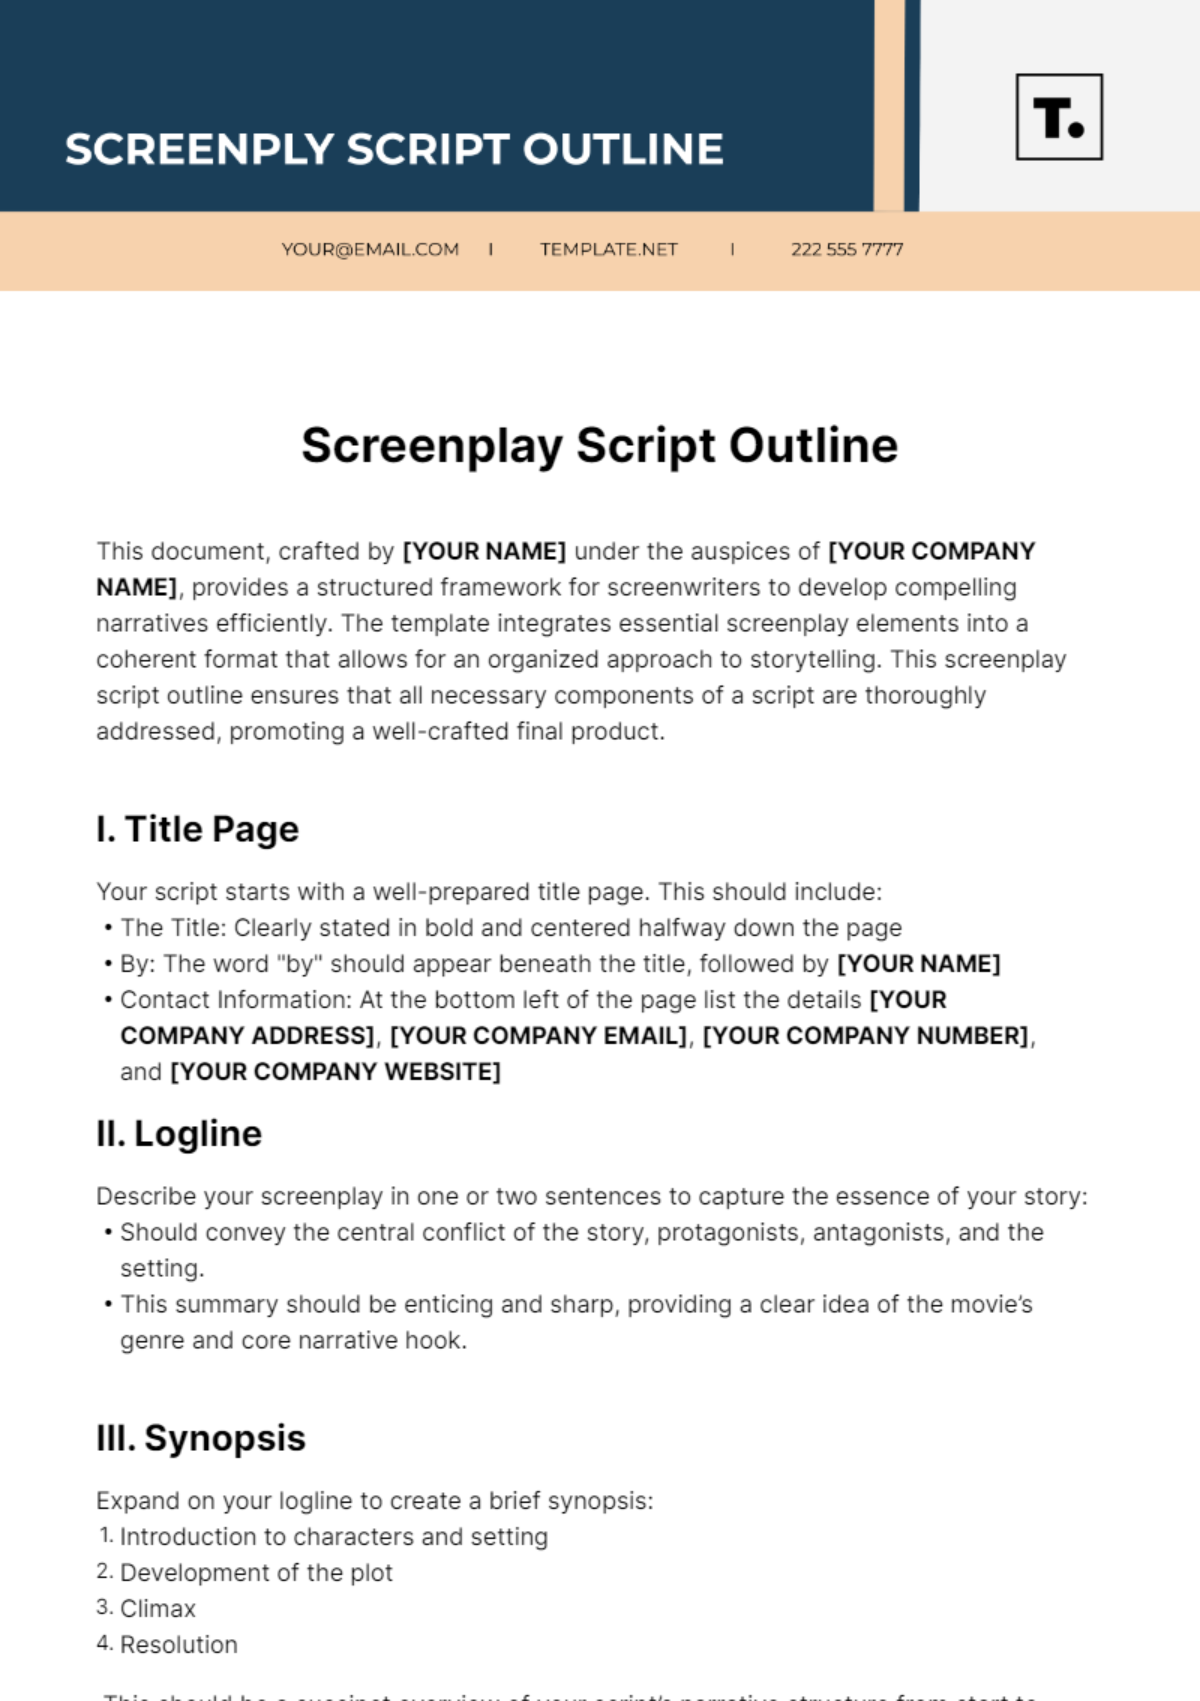 Screenplay Script Outline Template